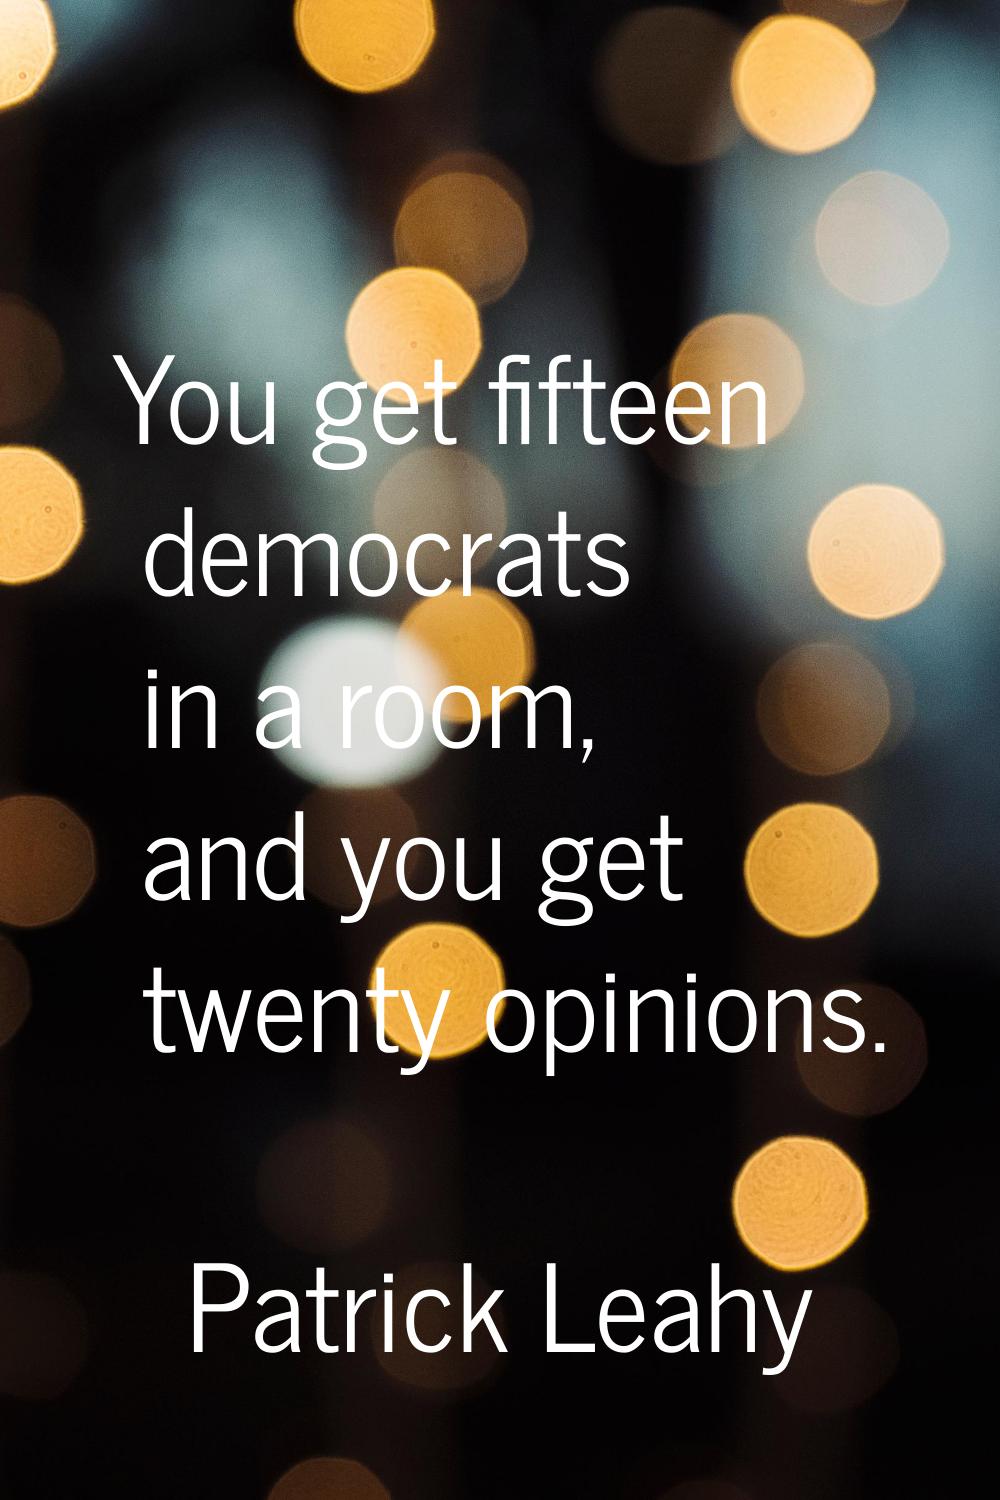 You get fifteen democrats in a room, and you get twenty opinions.